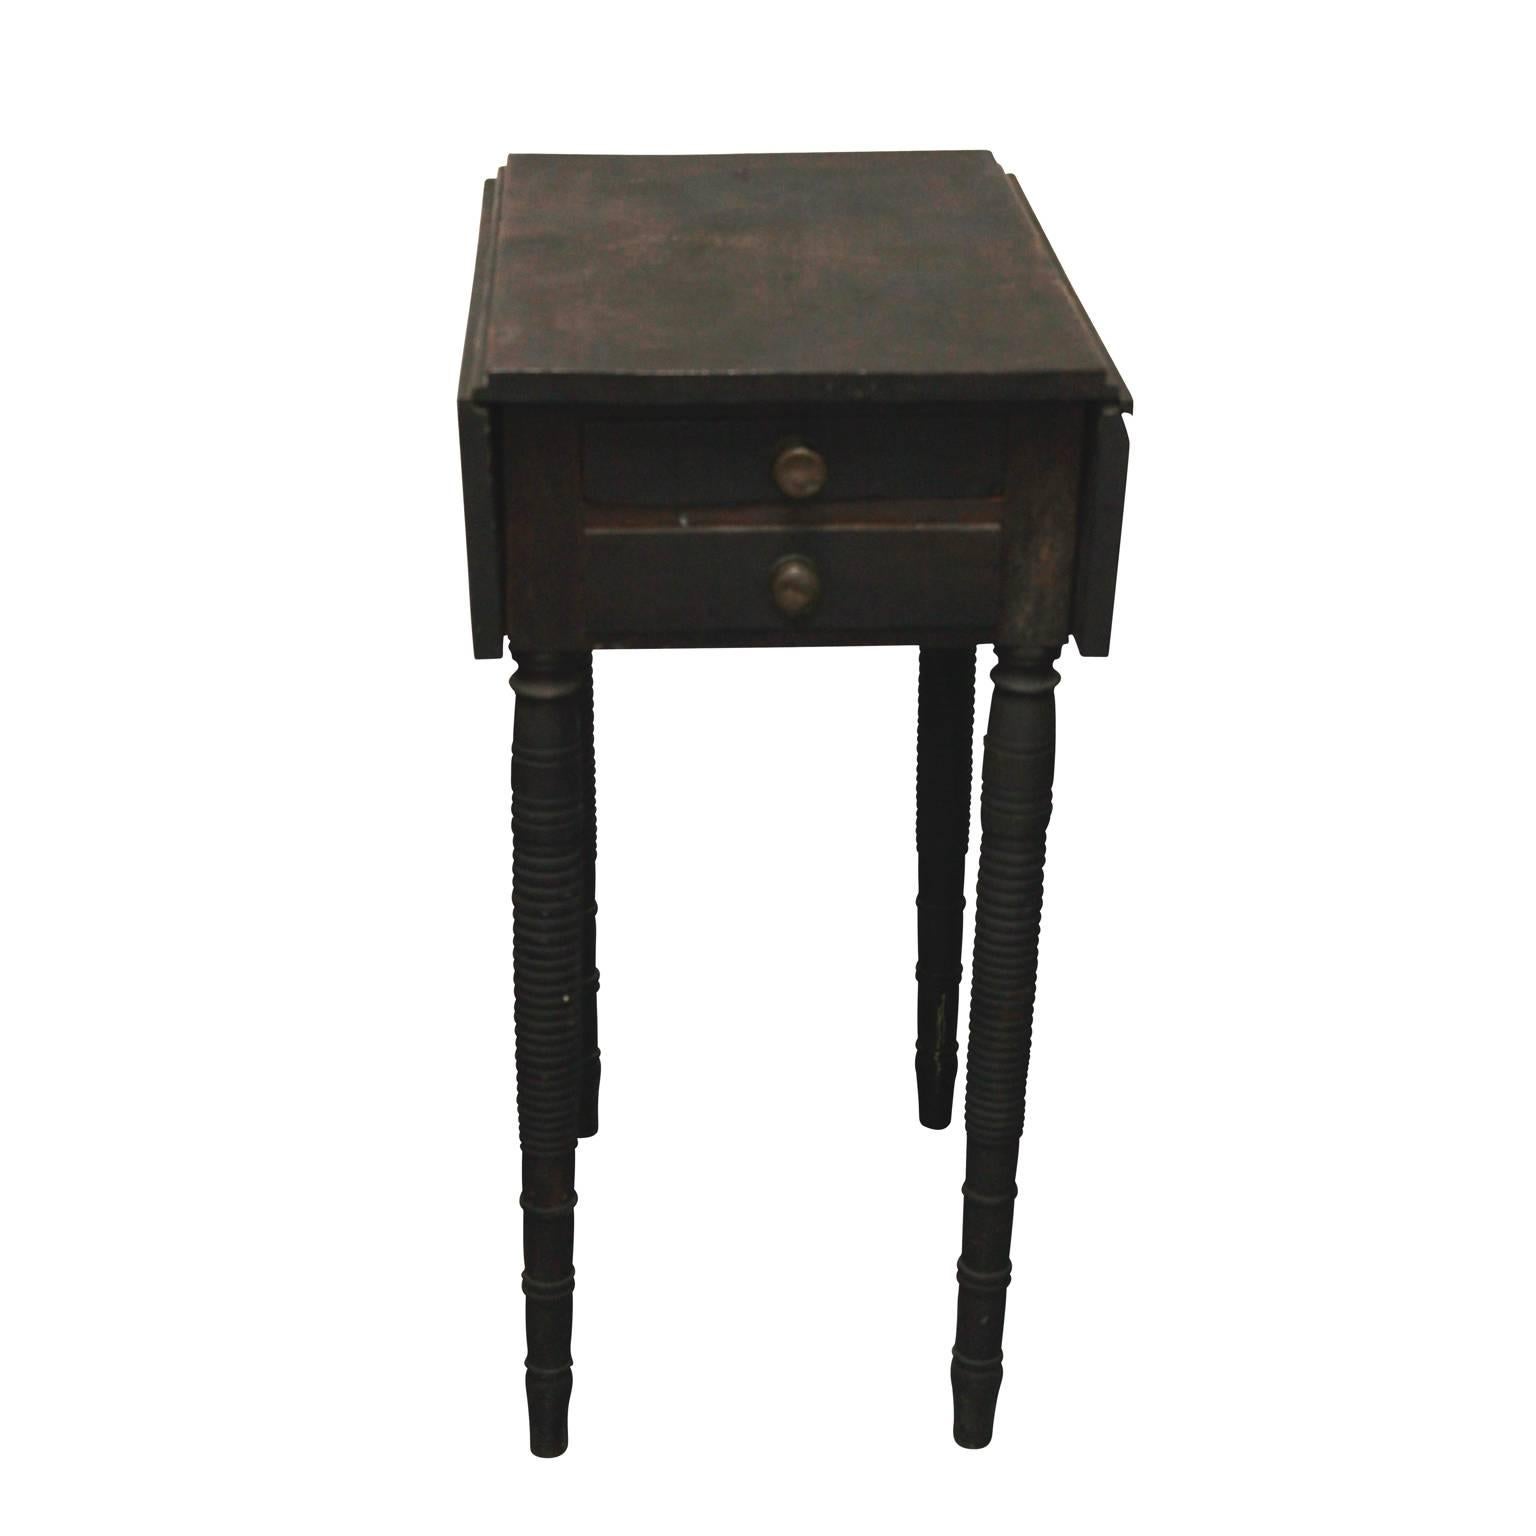 A 19th century Pembroke table, painted black, in original condition; has two drawers.